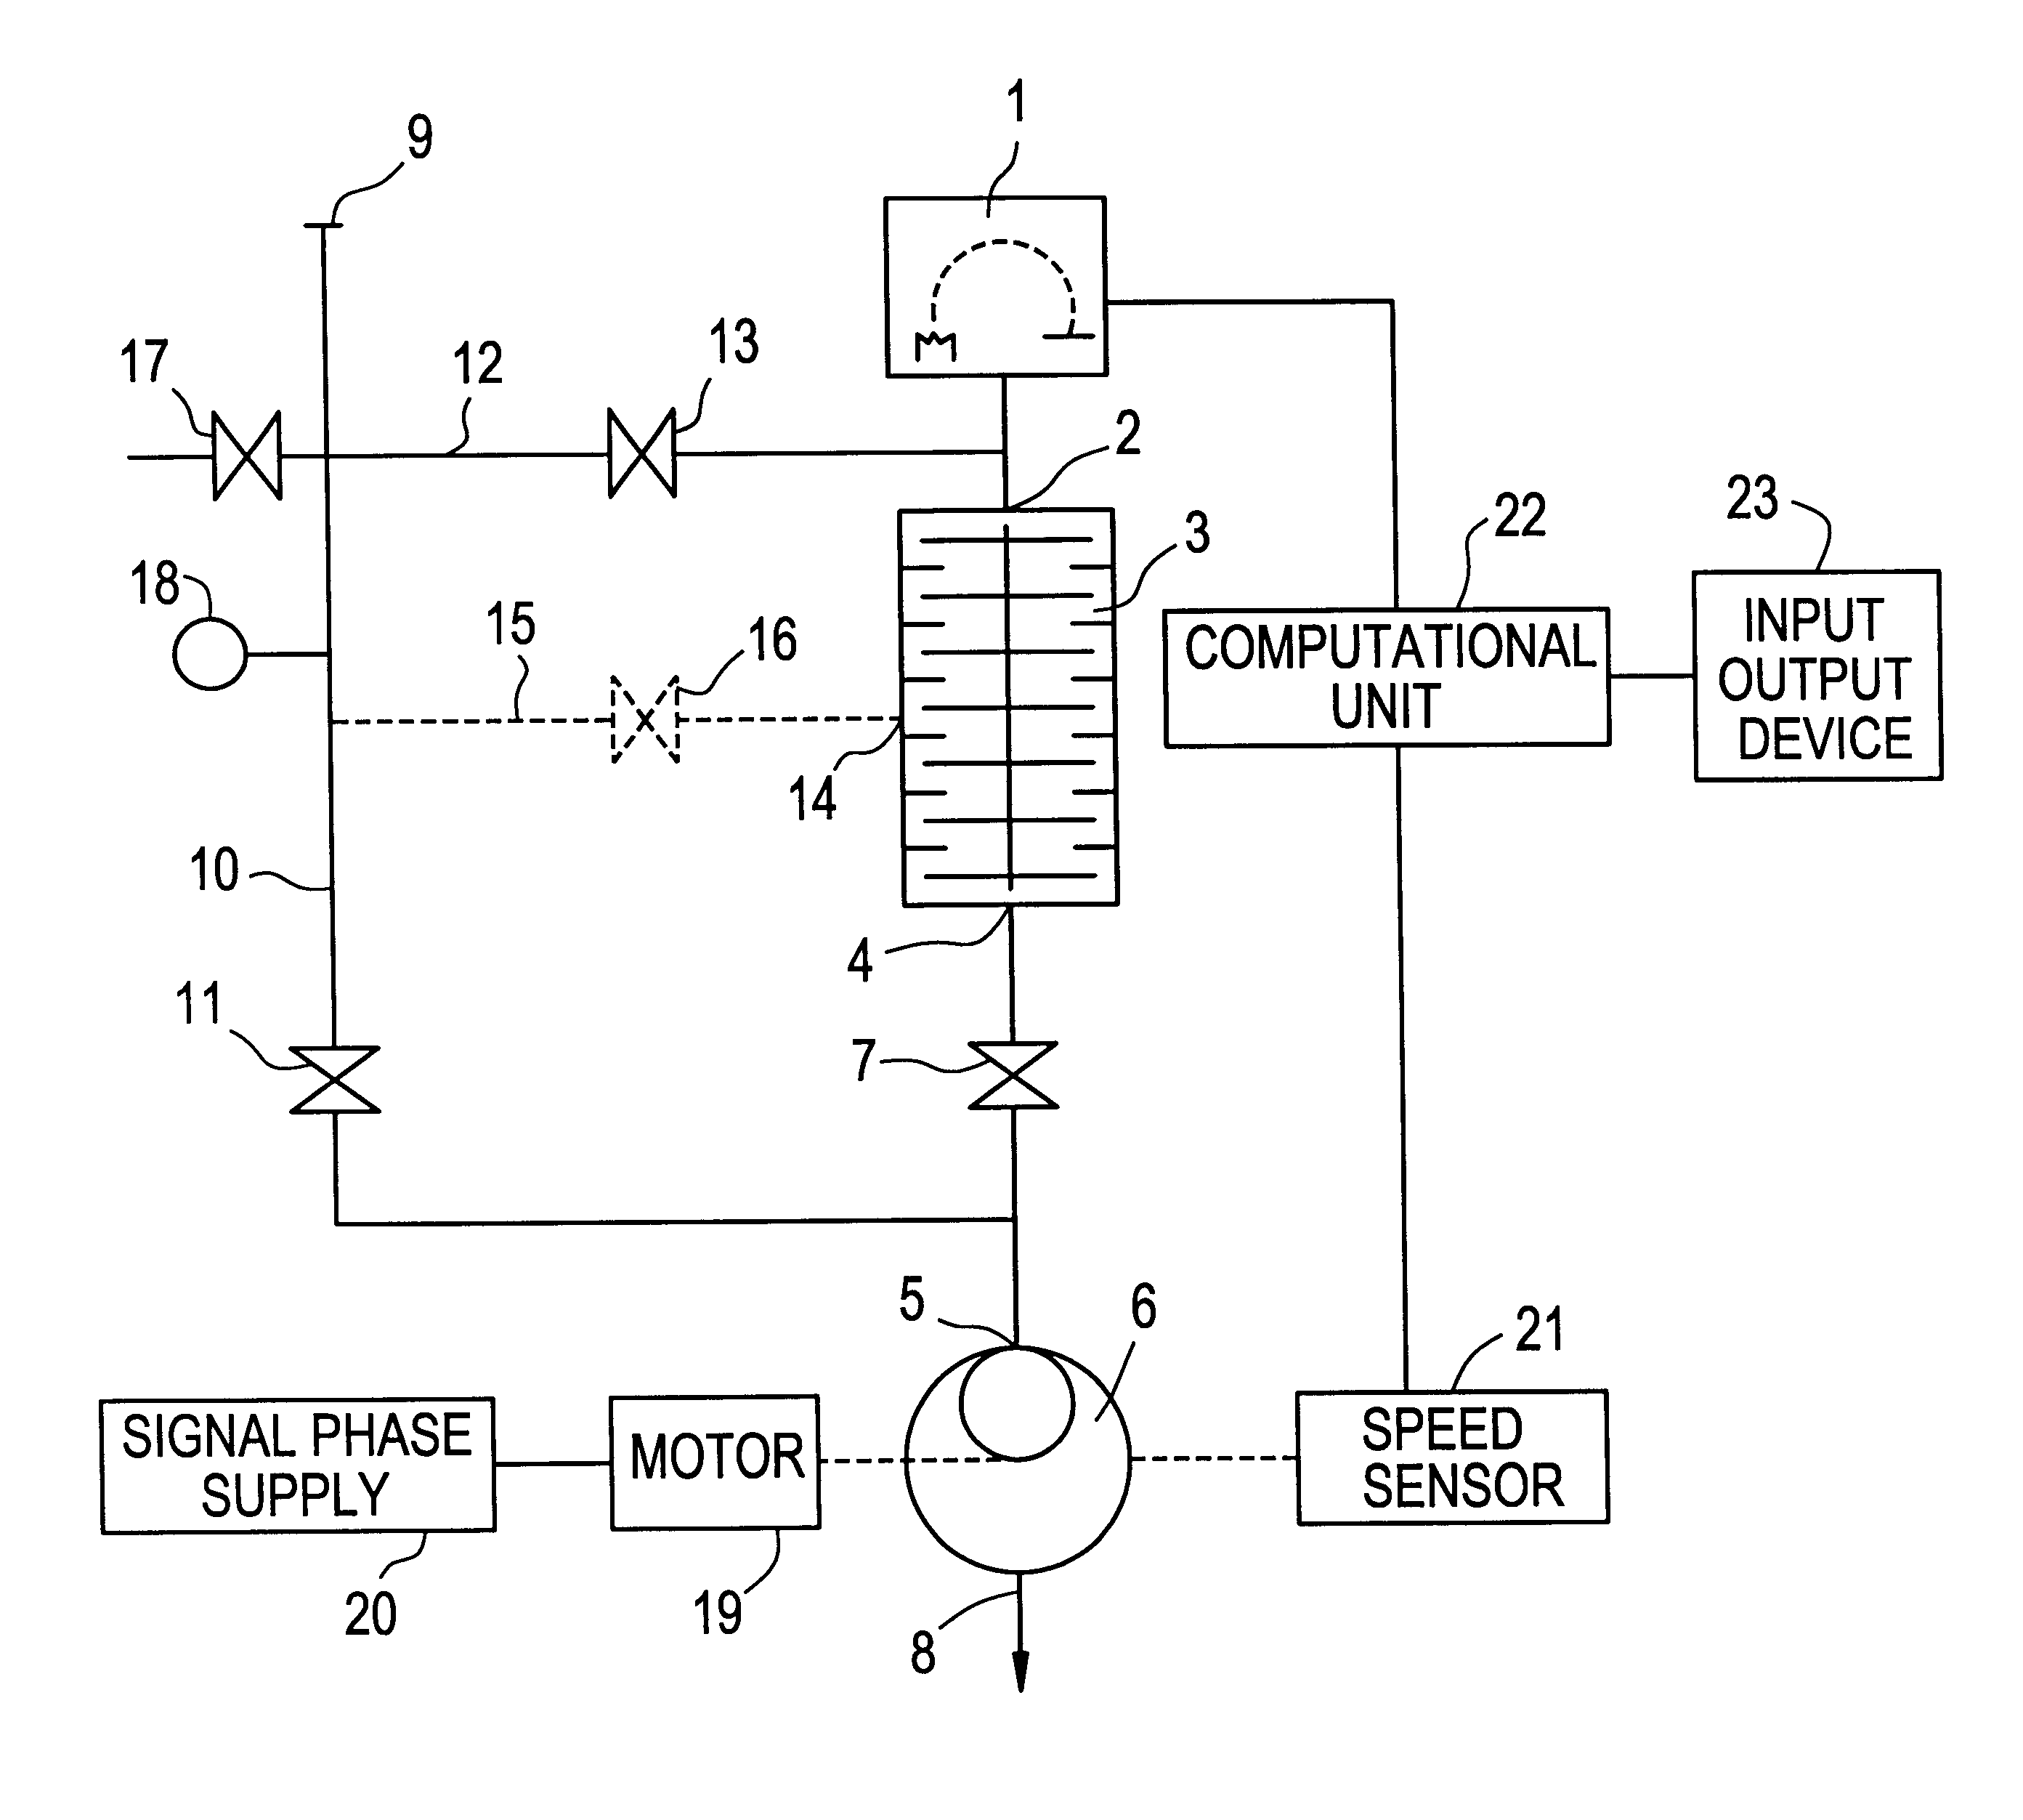 Variable speed primary pumping in a tracer gas leak detector